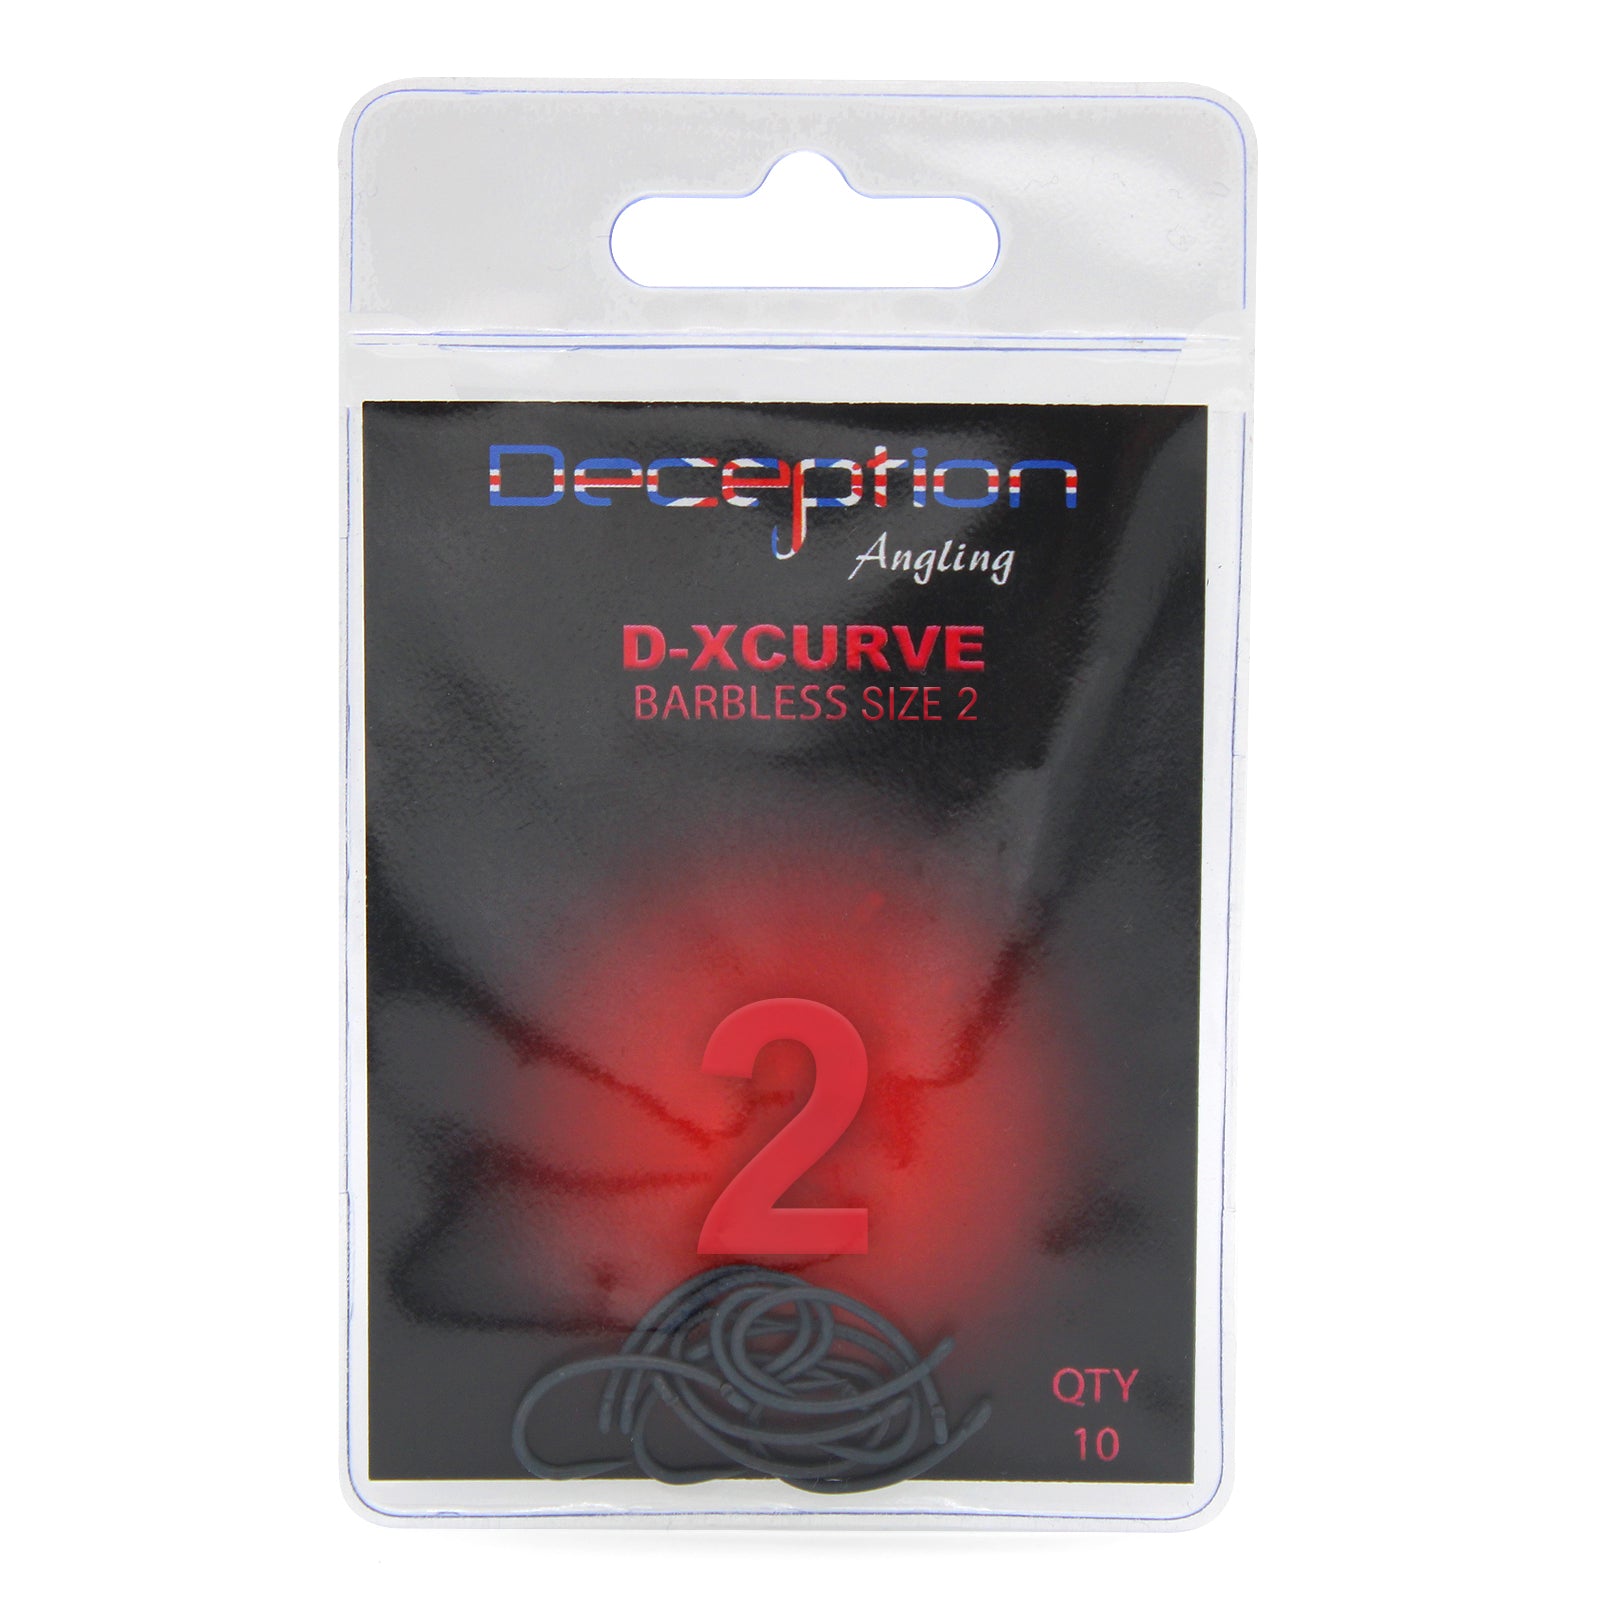 Deception Angling D-XCurve Barbless Fishing Hooks Pack of 10 Size 2